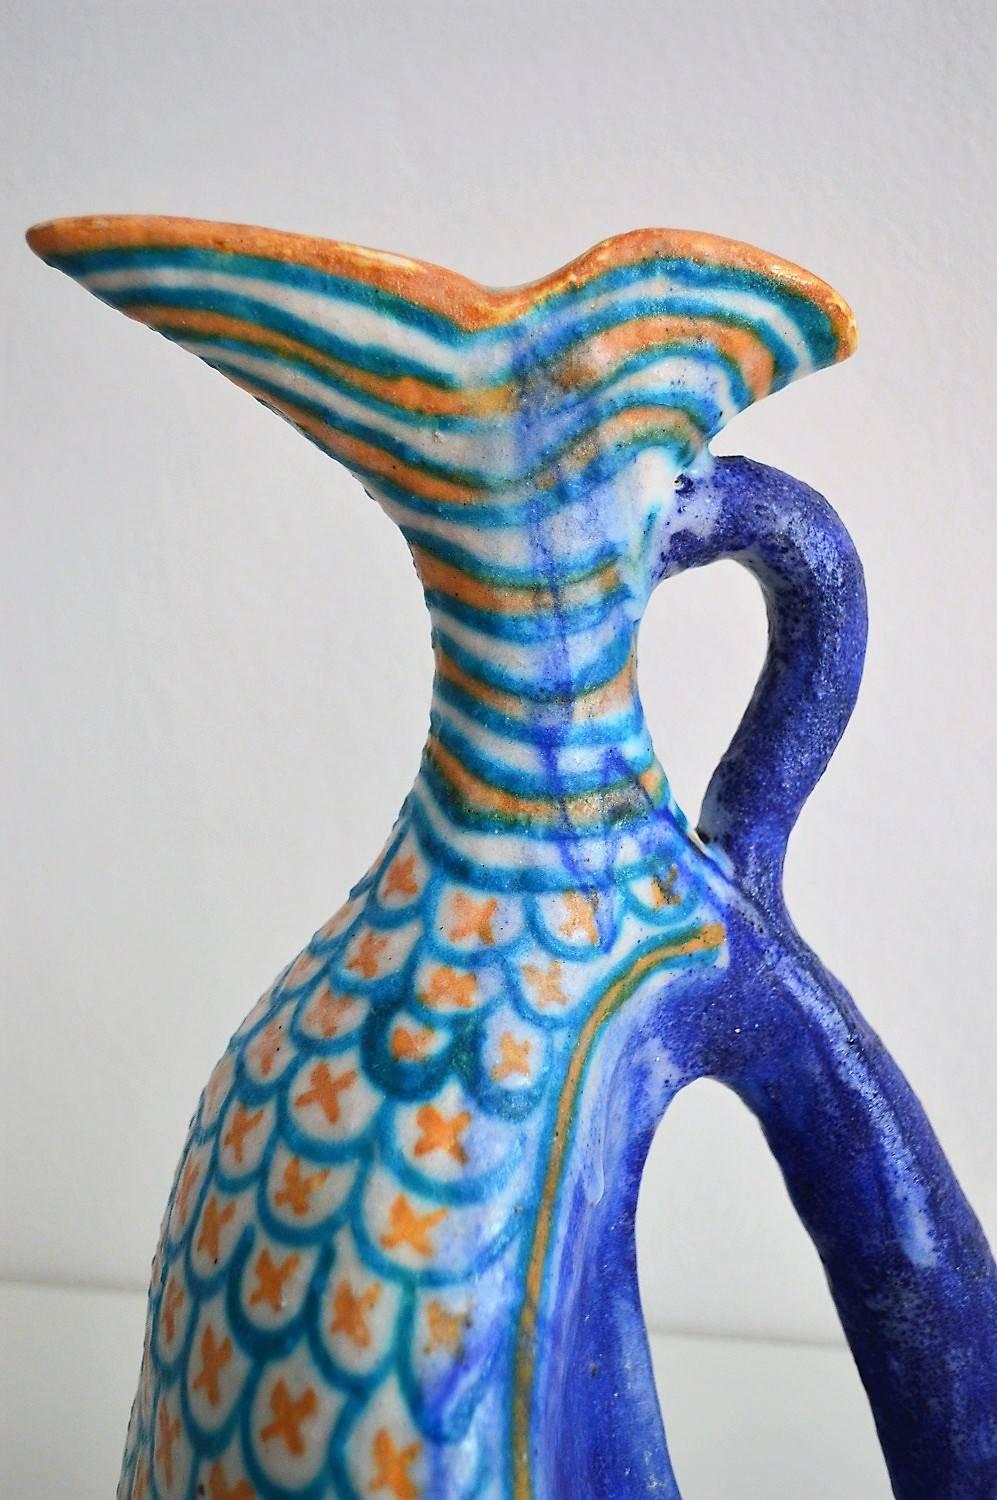 Beautiful, big and sophisticated ceramic vessel.
Handcrafted and decorated with gorgeous, multicolored shiny and intense glaze in different nuances. The thick glaze is partially worn and in some parts dripped down (wanted). 
This piece is done in